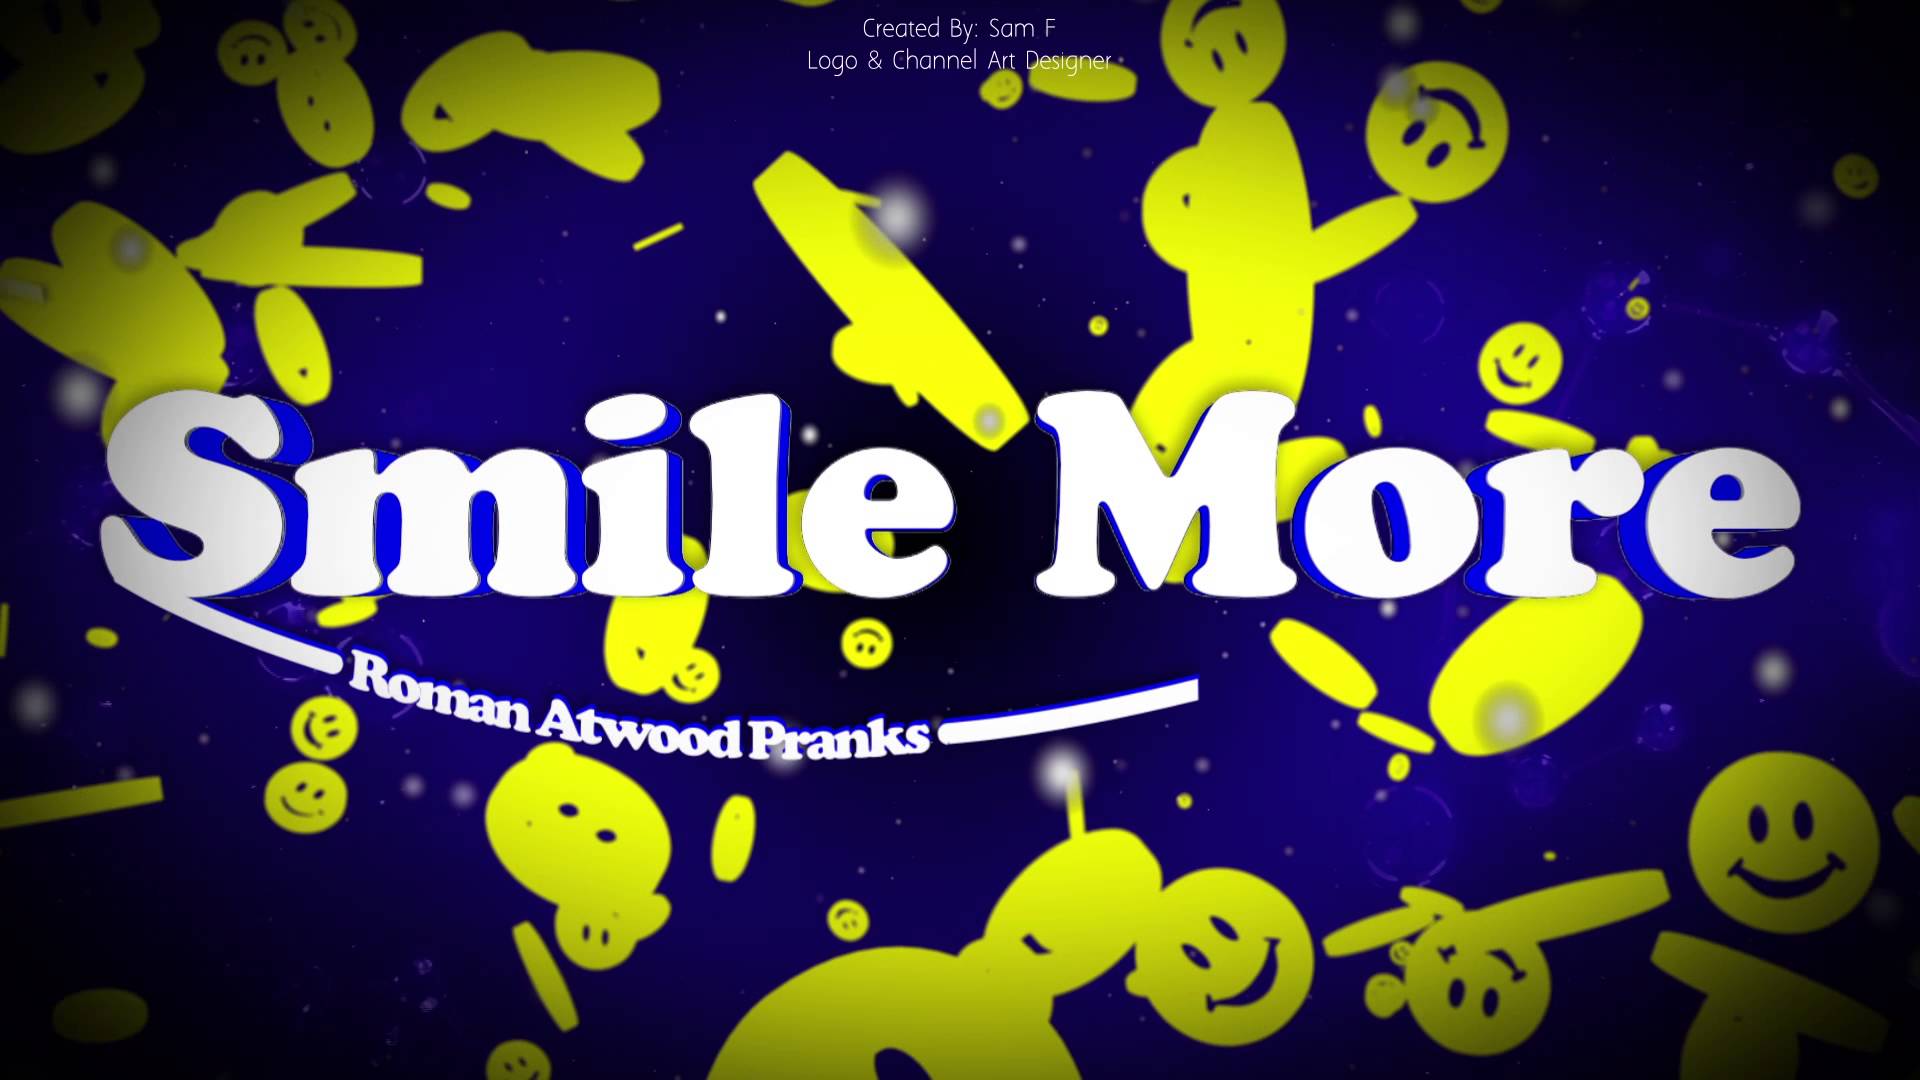 Smile More Wallpapers 1920x1080 12091 KB